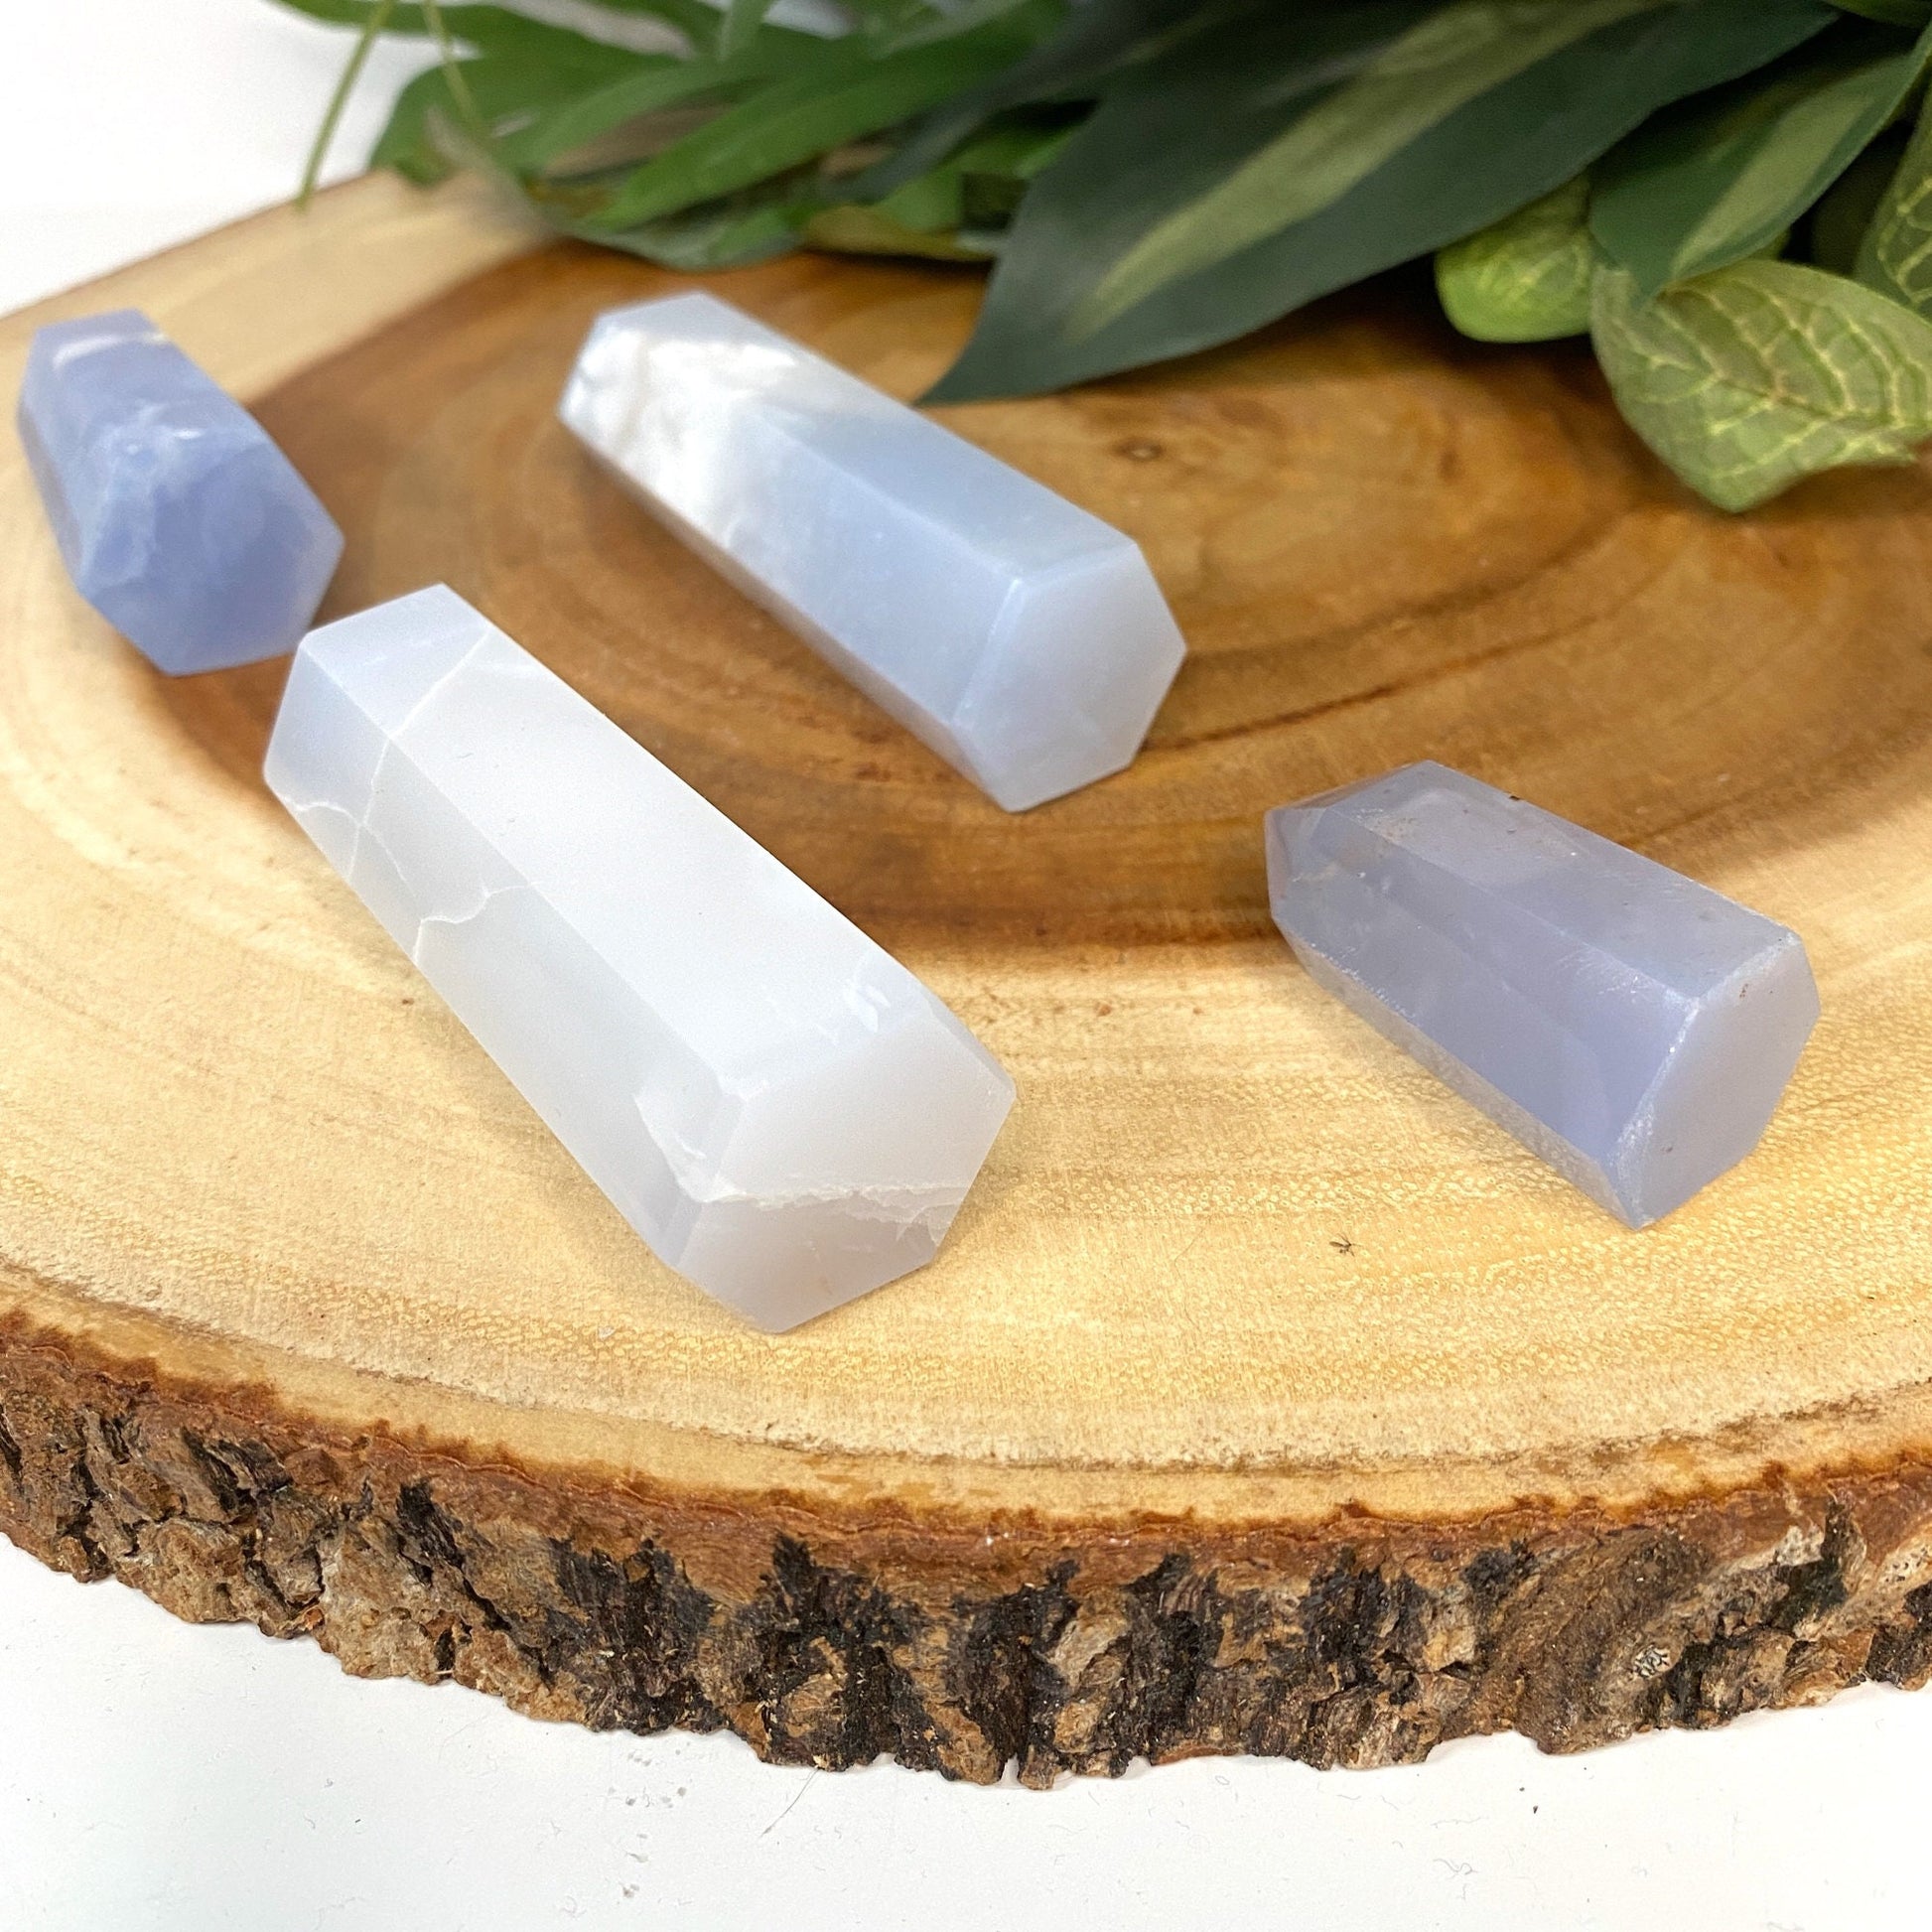 Natural Blue Chalcedony Tower Point from Turkey - Blue Crystal for Meditation, Crystal Grids, Healing, Reiki Chakra, Altars, Wand